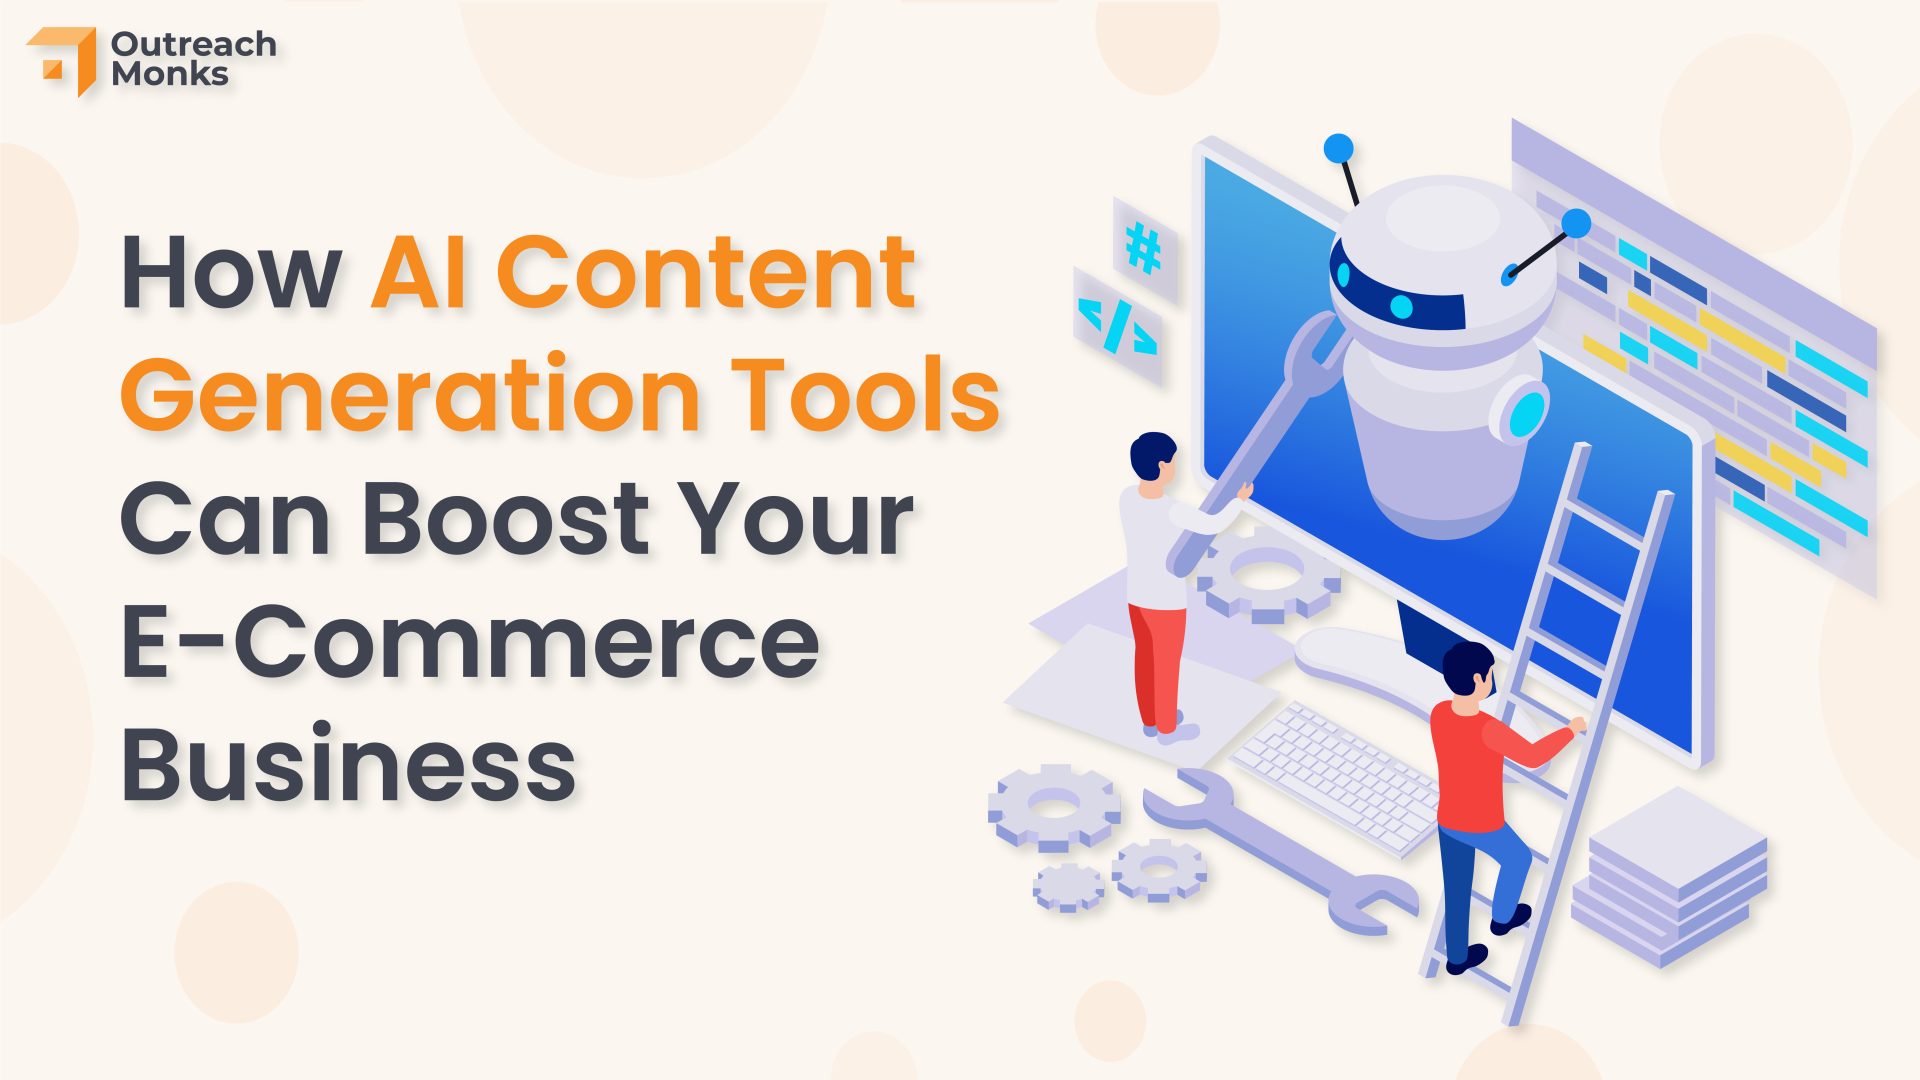 How AI Content Generation Tools Can Boost Your E-Commerce Business